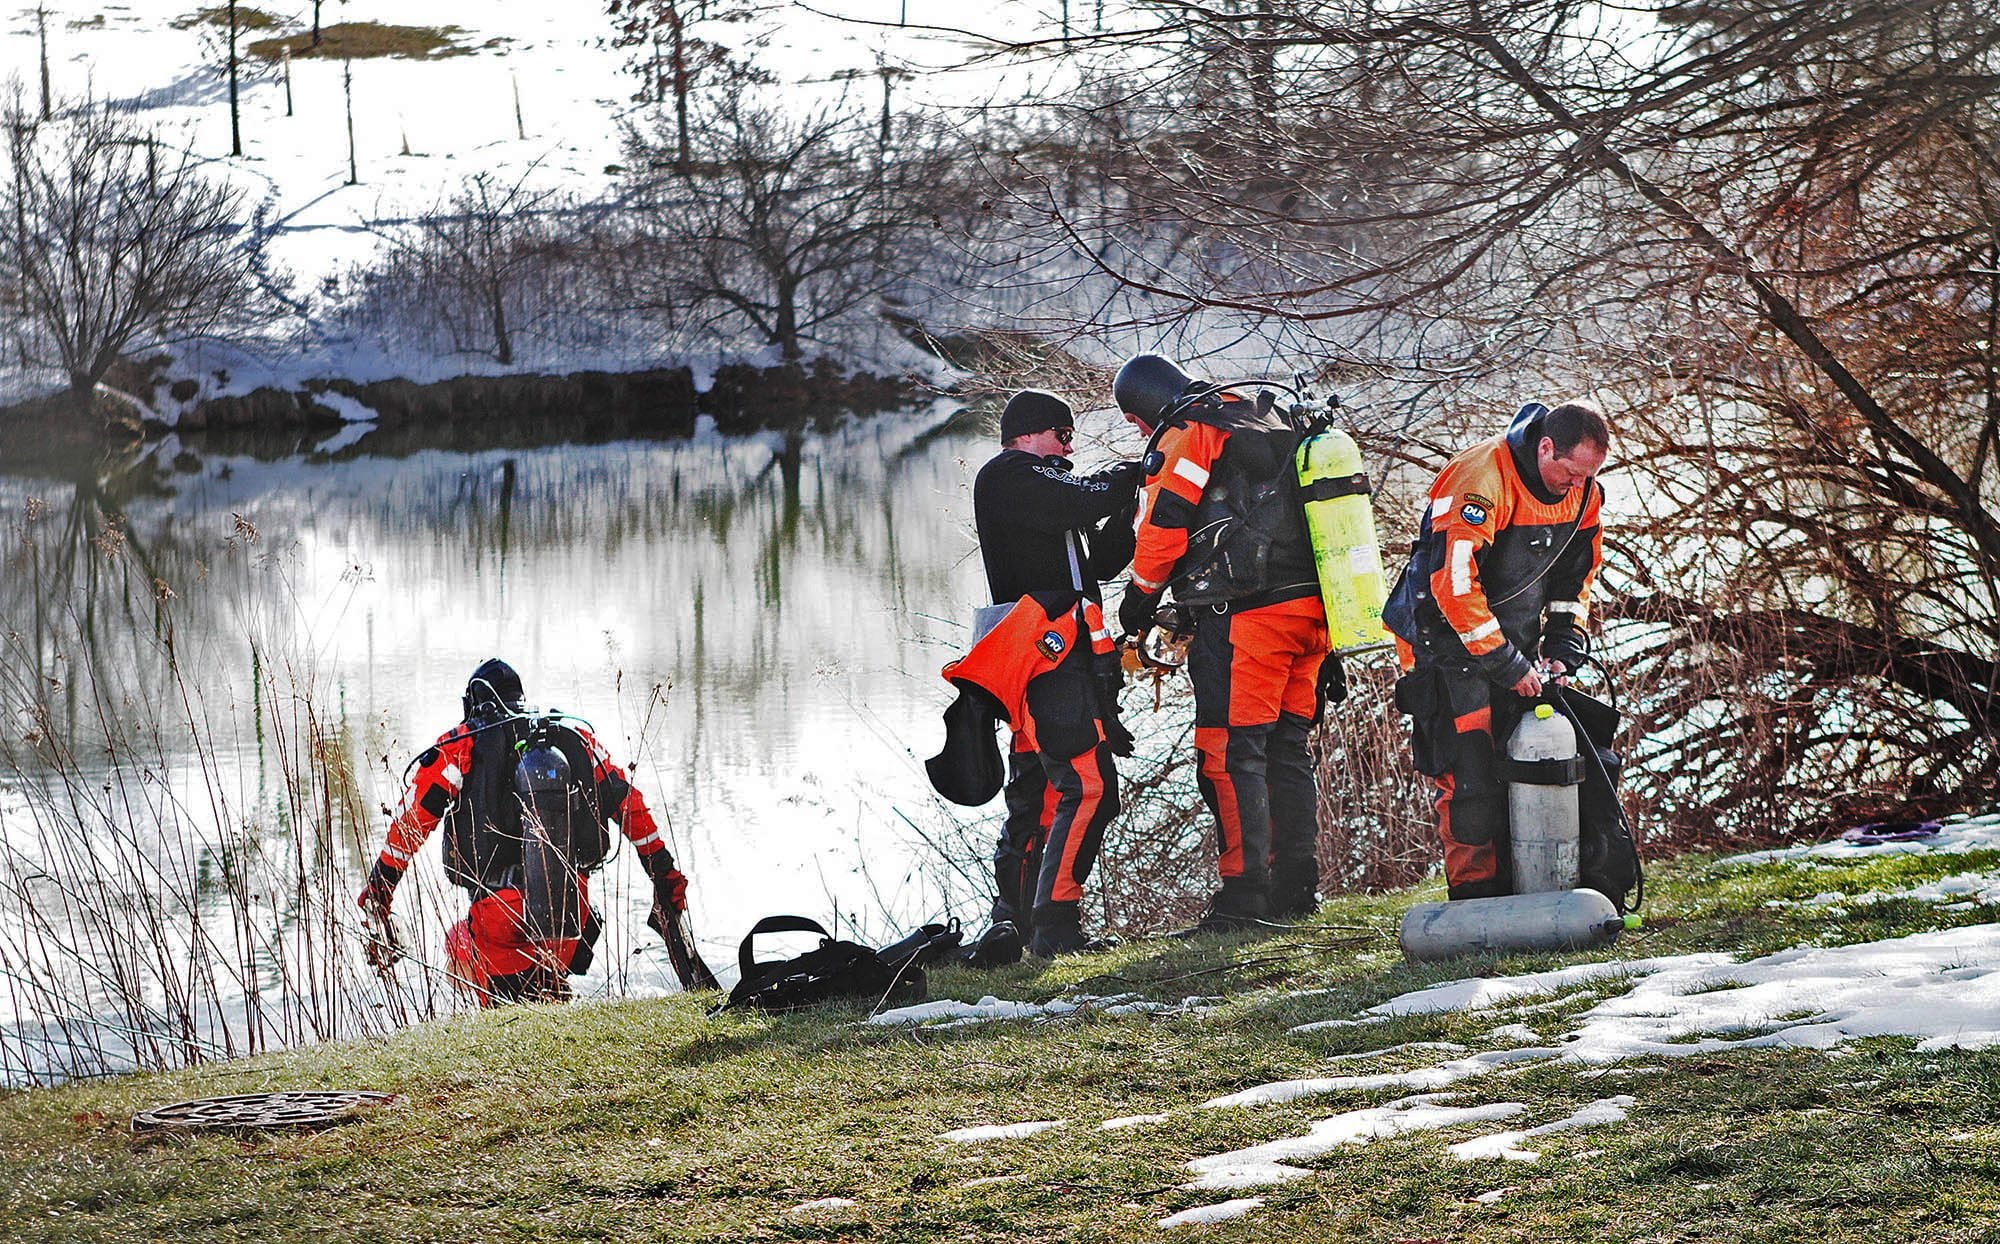 Troopers prepare to search the Duck Pond in Blacksburg, Va., Jan. 30. The investigation continued in the death of Nicole Madison Lovell as a state police search and recovery team searched the pond for evidence on the Virginia Tech Campus.